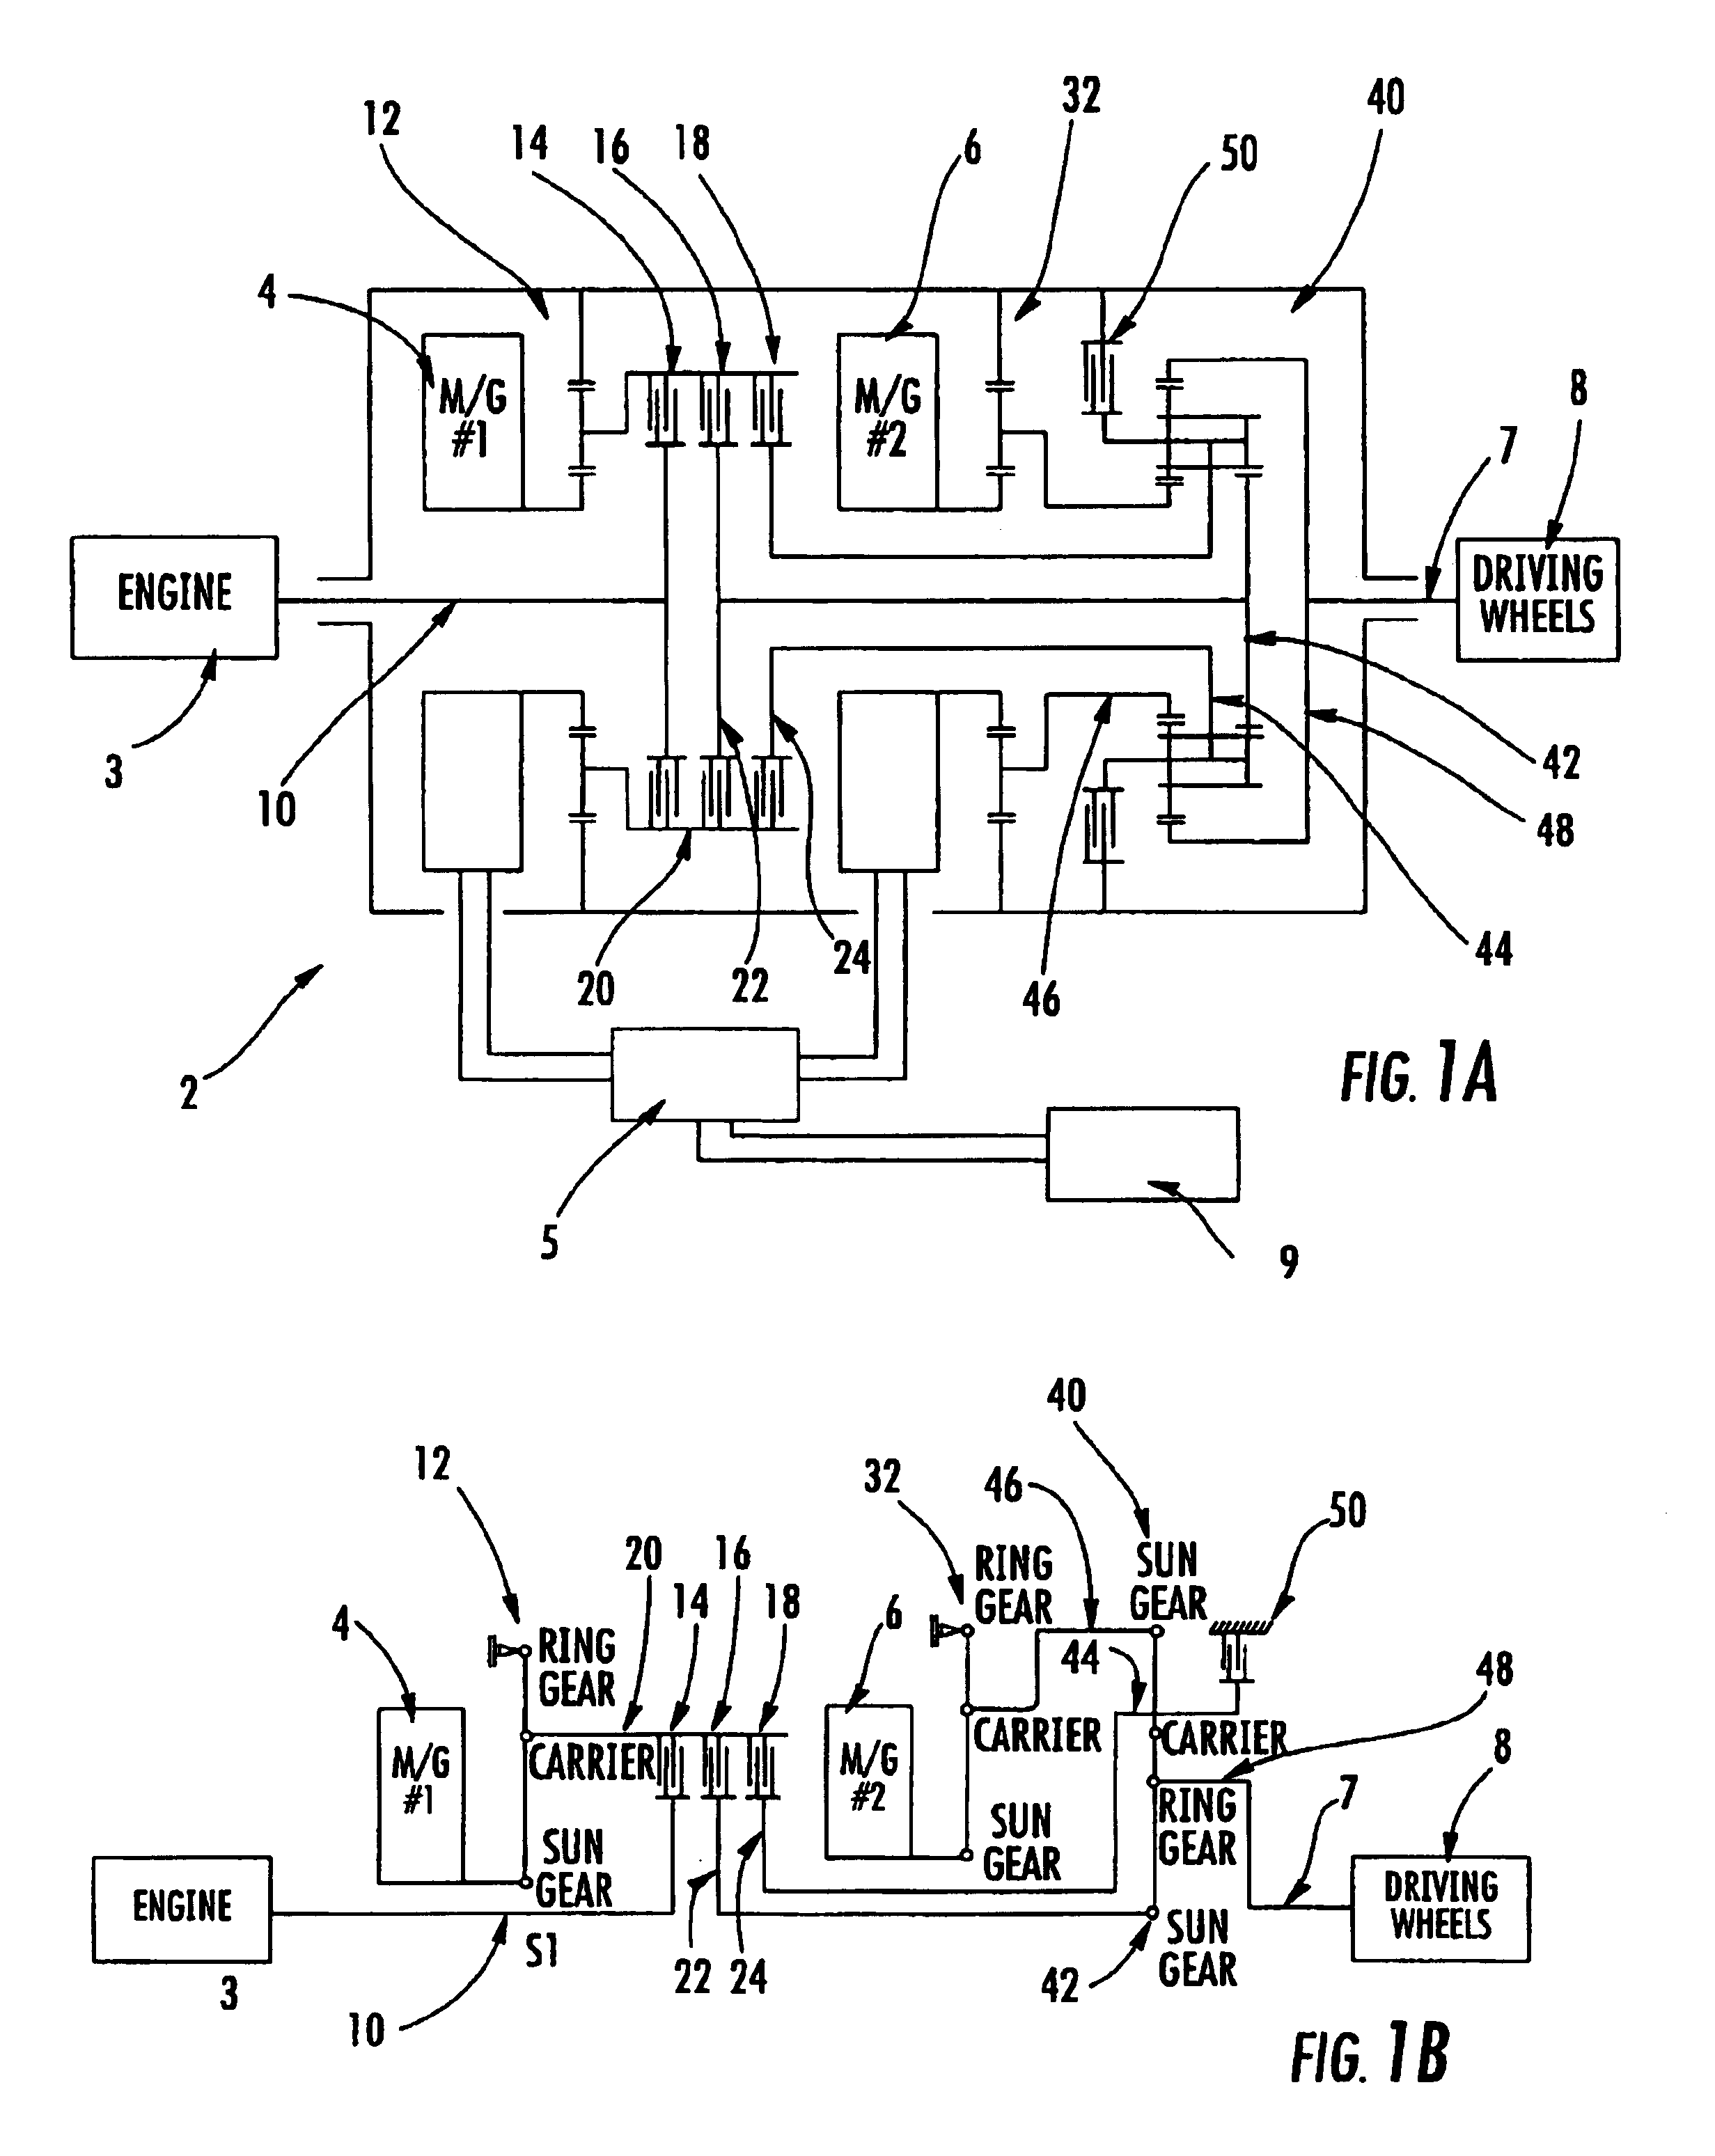 Multi-range parallel-hybrid continuously variable transmission